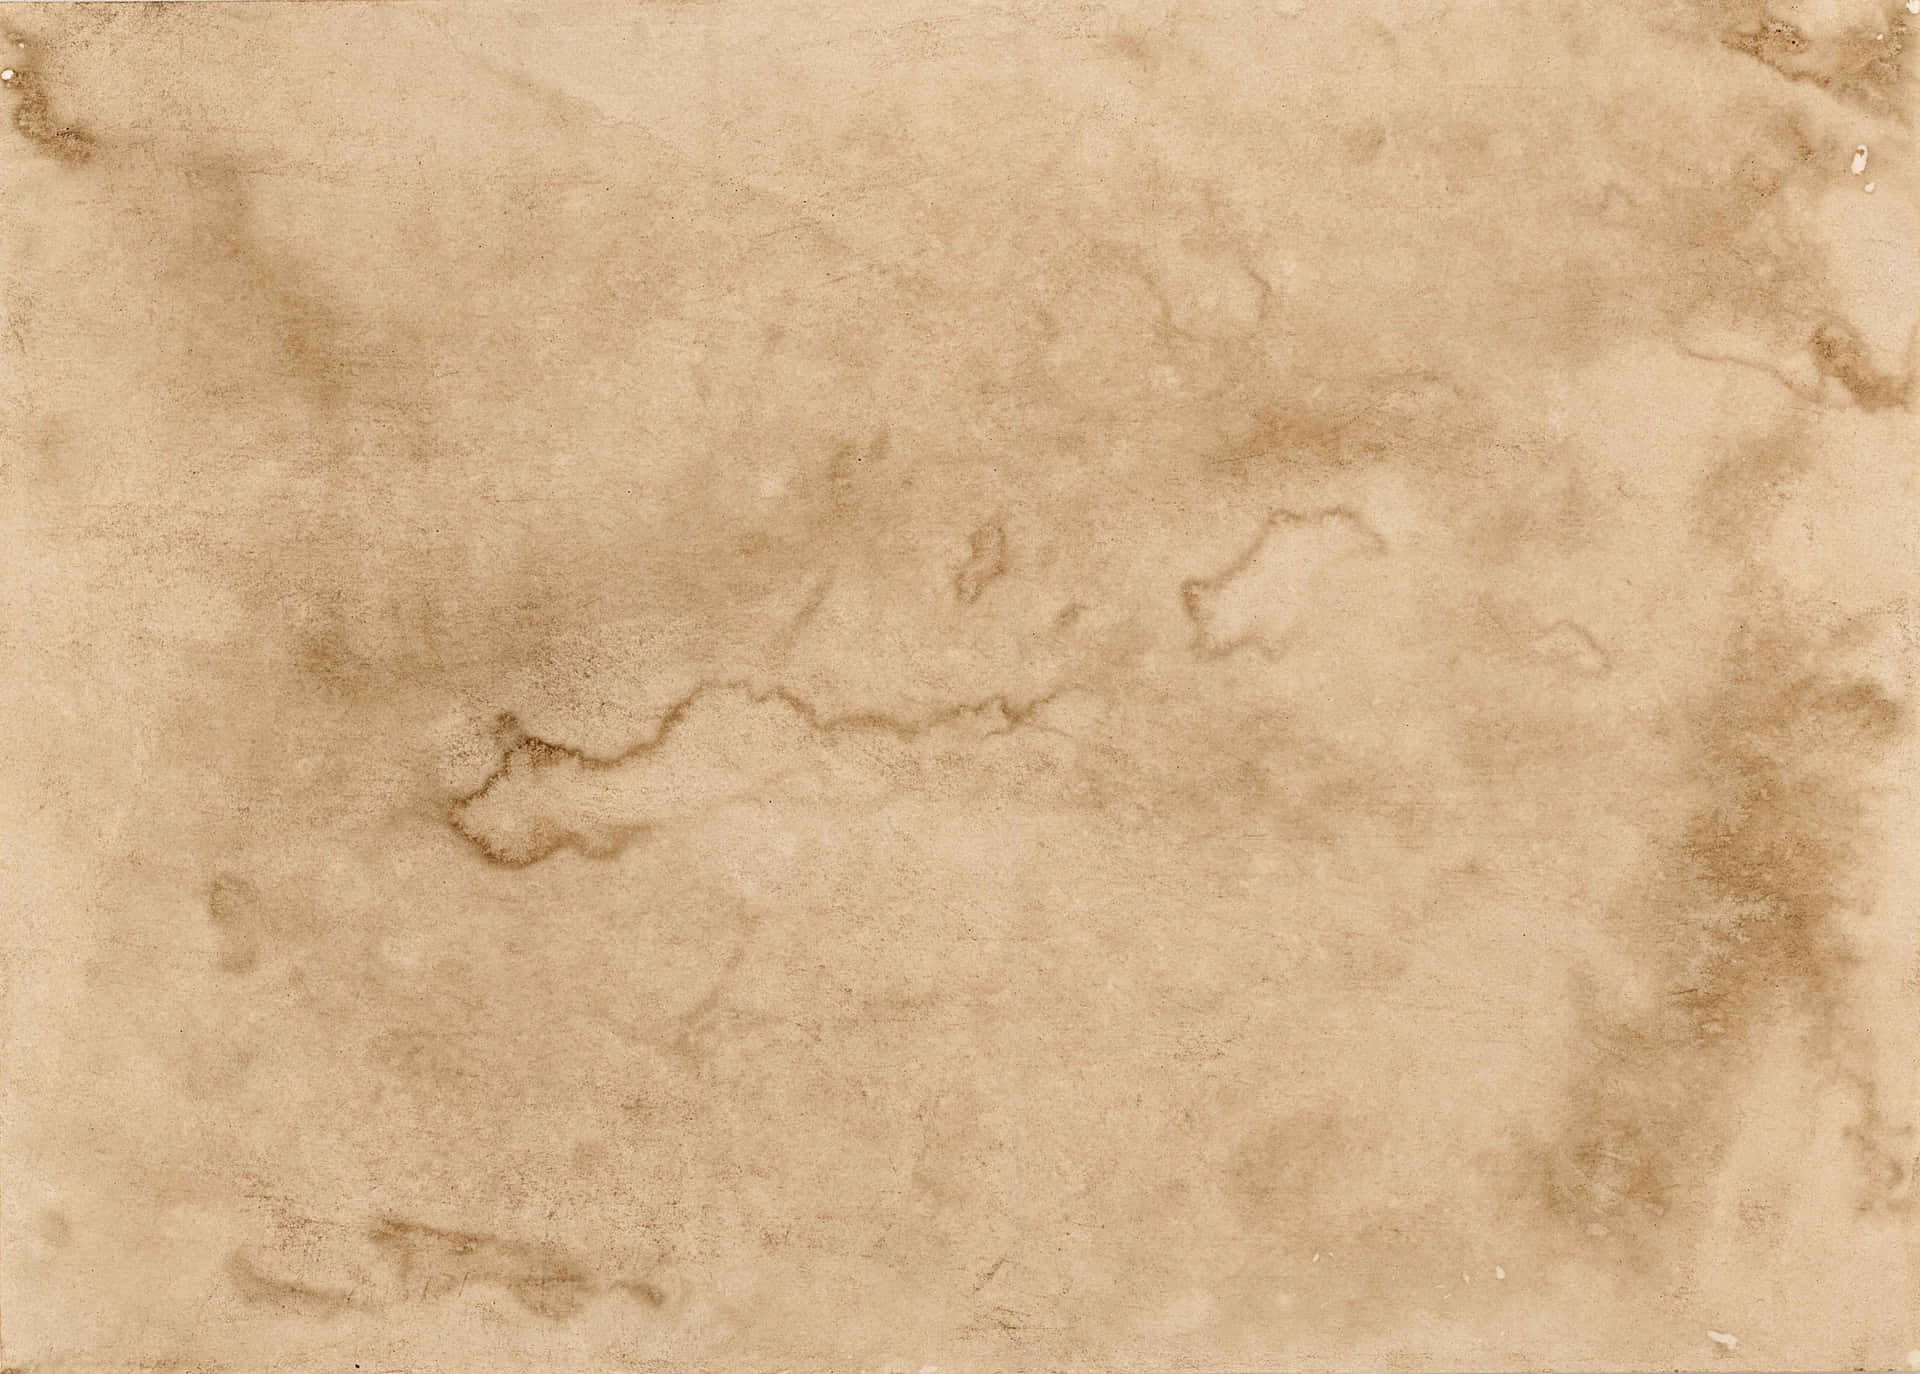 100+] Brown Paper Backgrounds